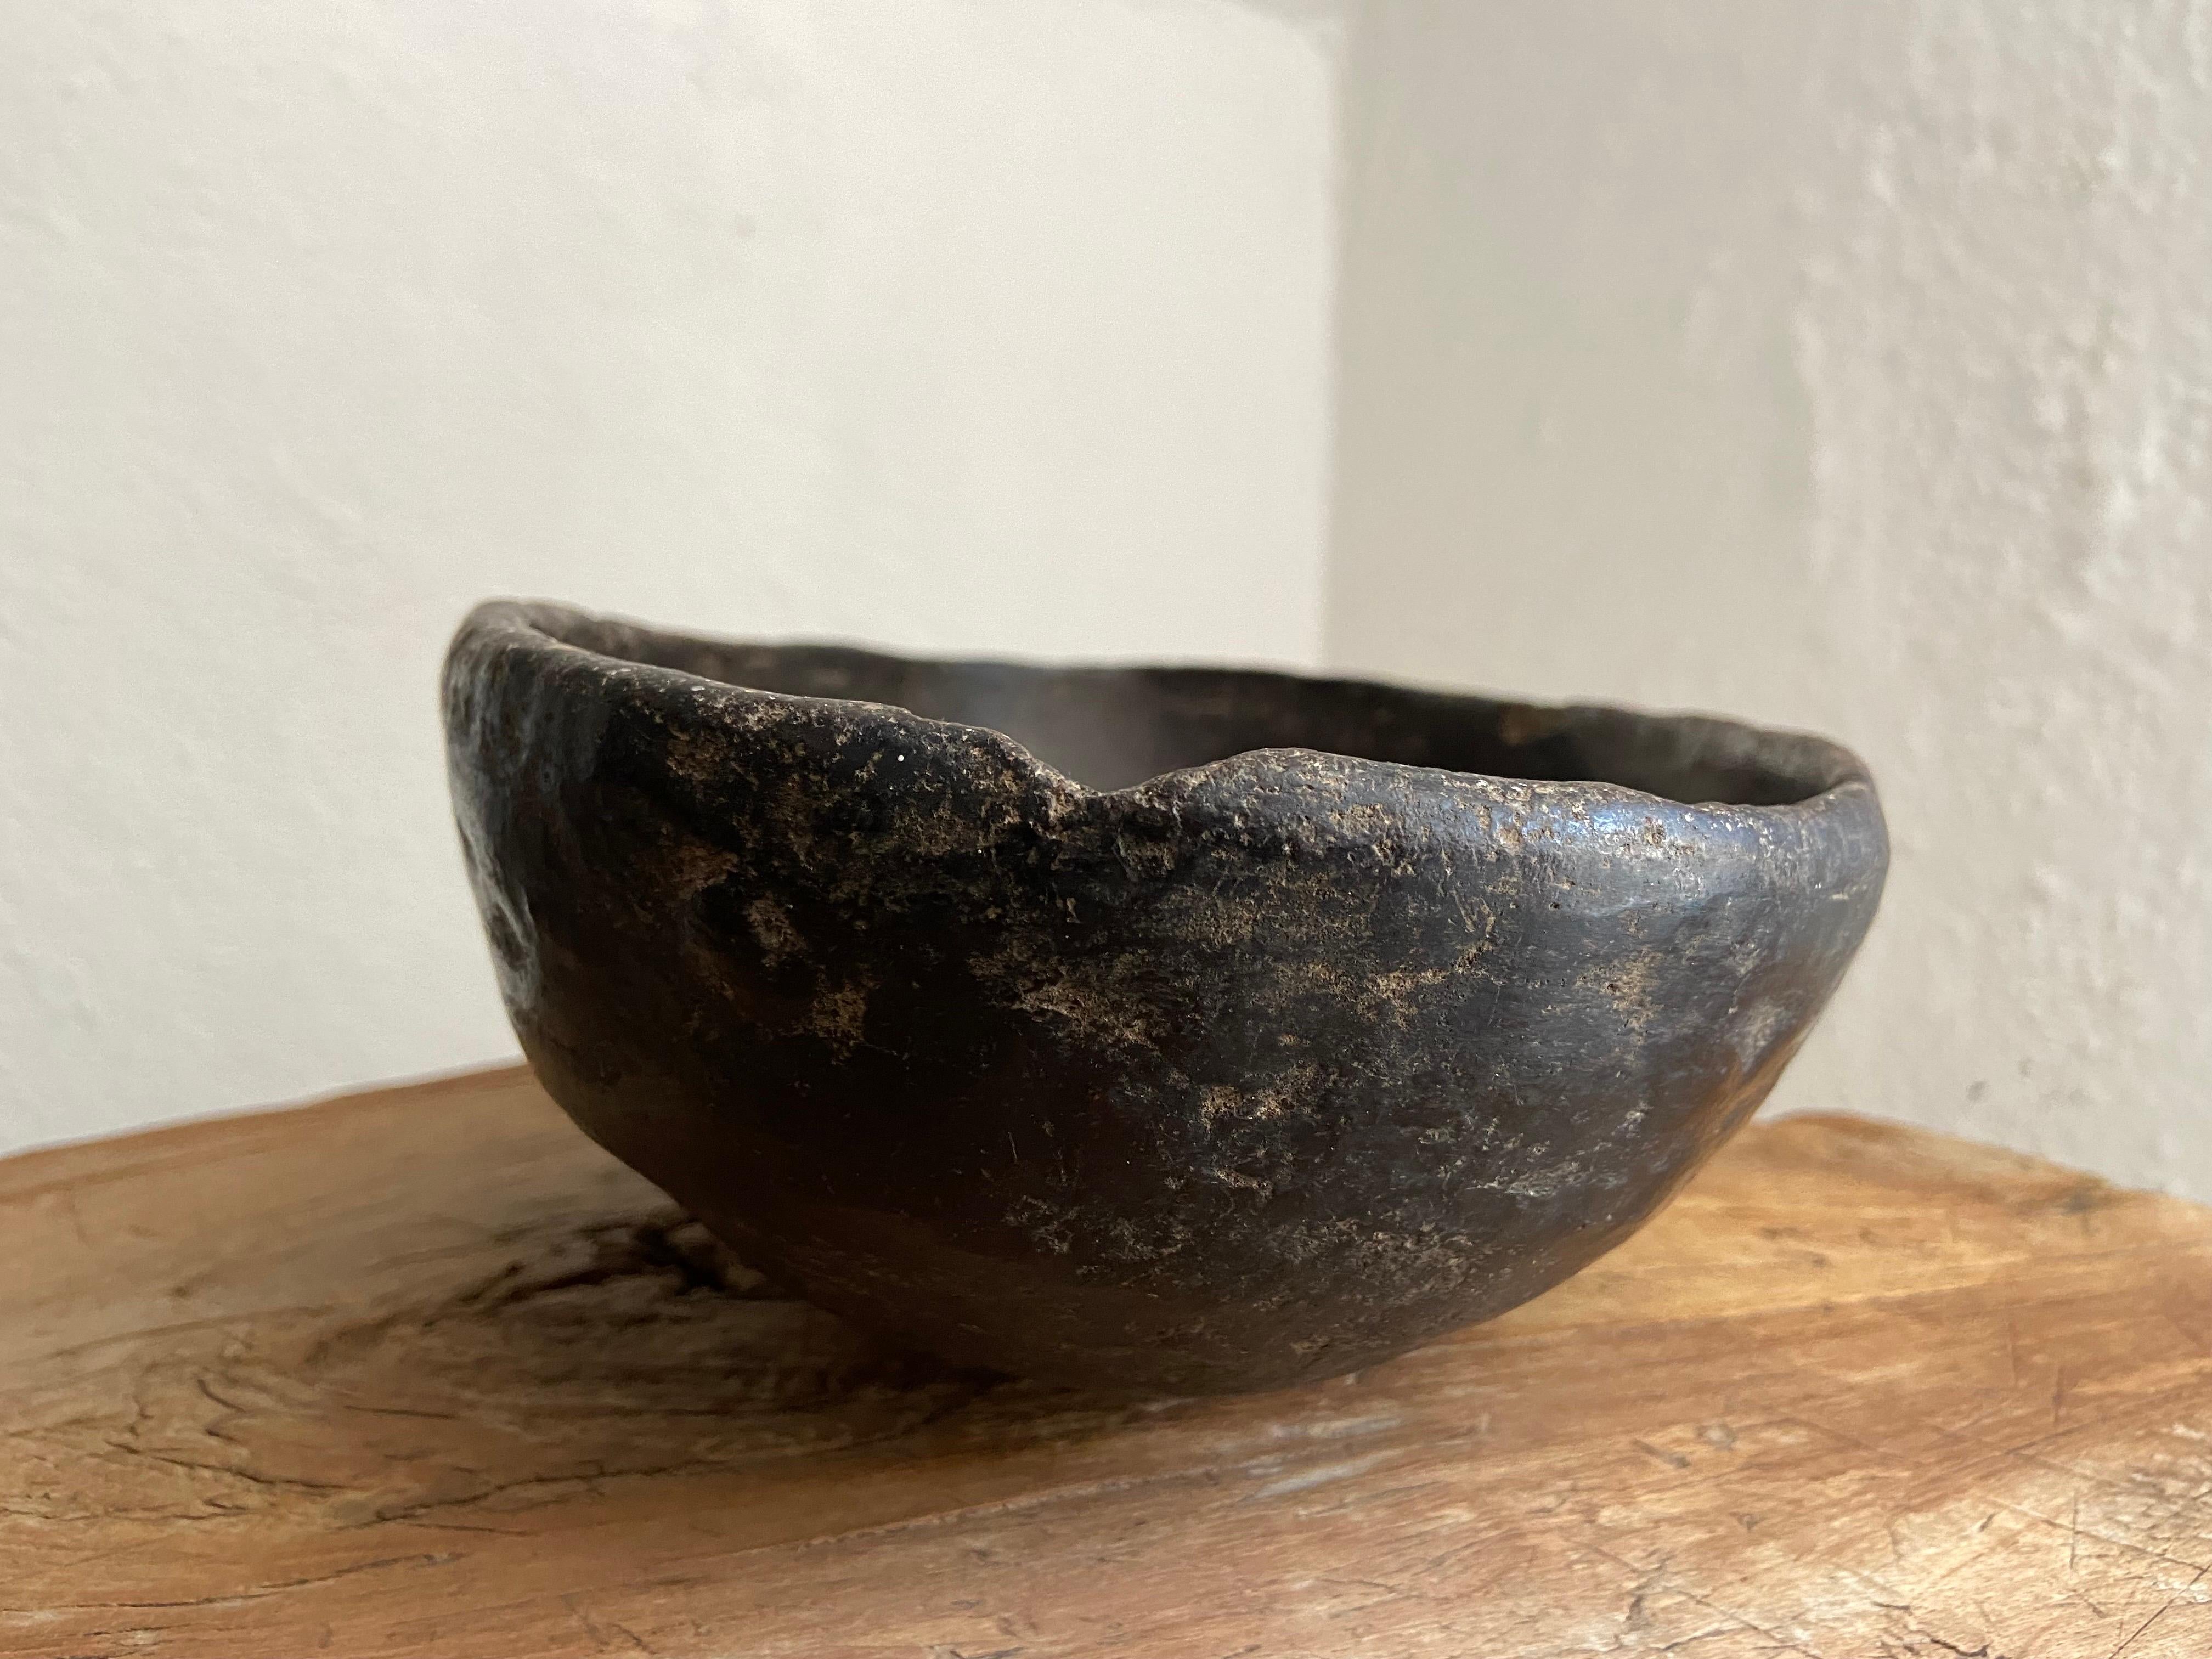 Rustic Primitive Styled Ceramic Bowl From The Mixteca Region of Oaxaca, Mexico